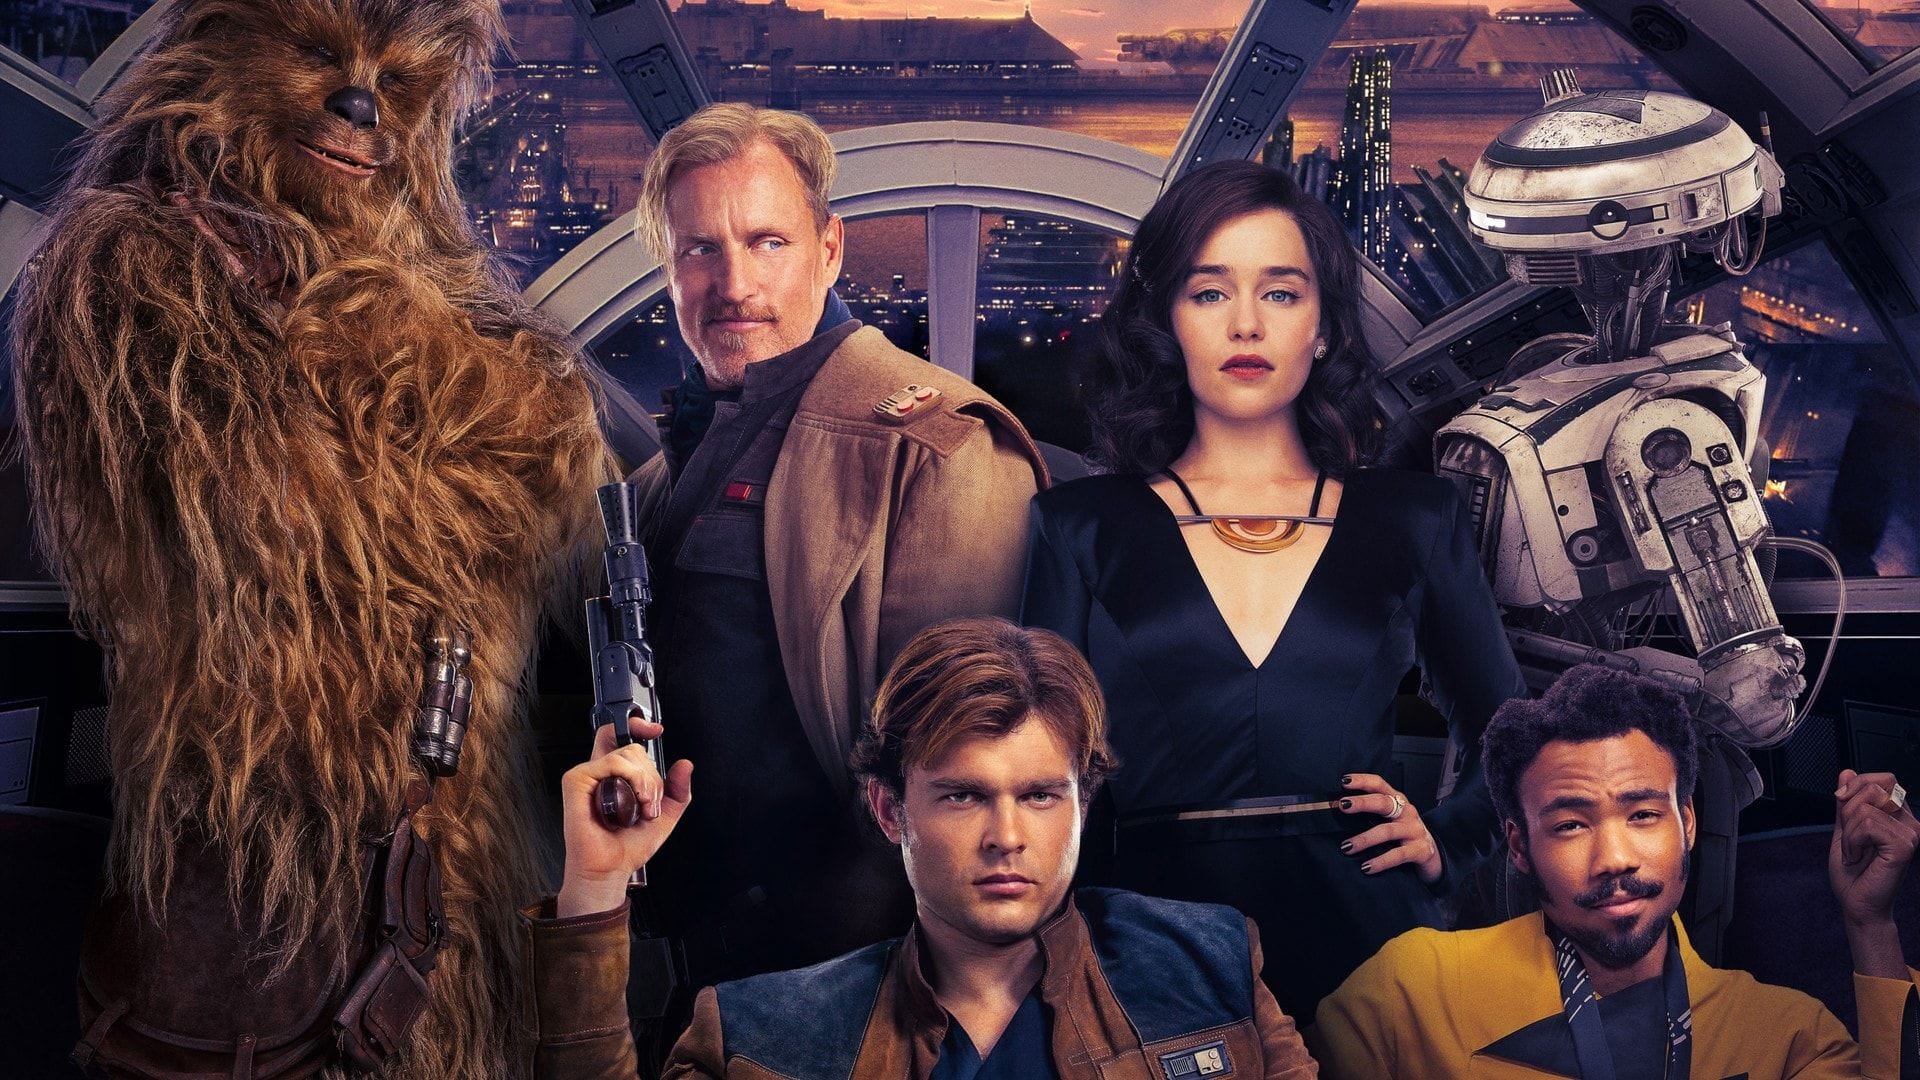 Solo A Star Wars Story Movie Wallpapers